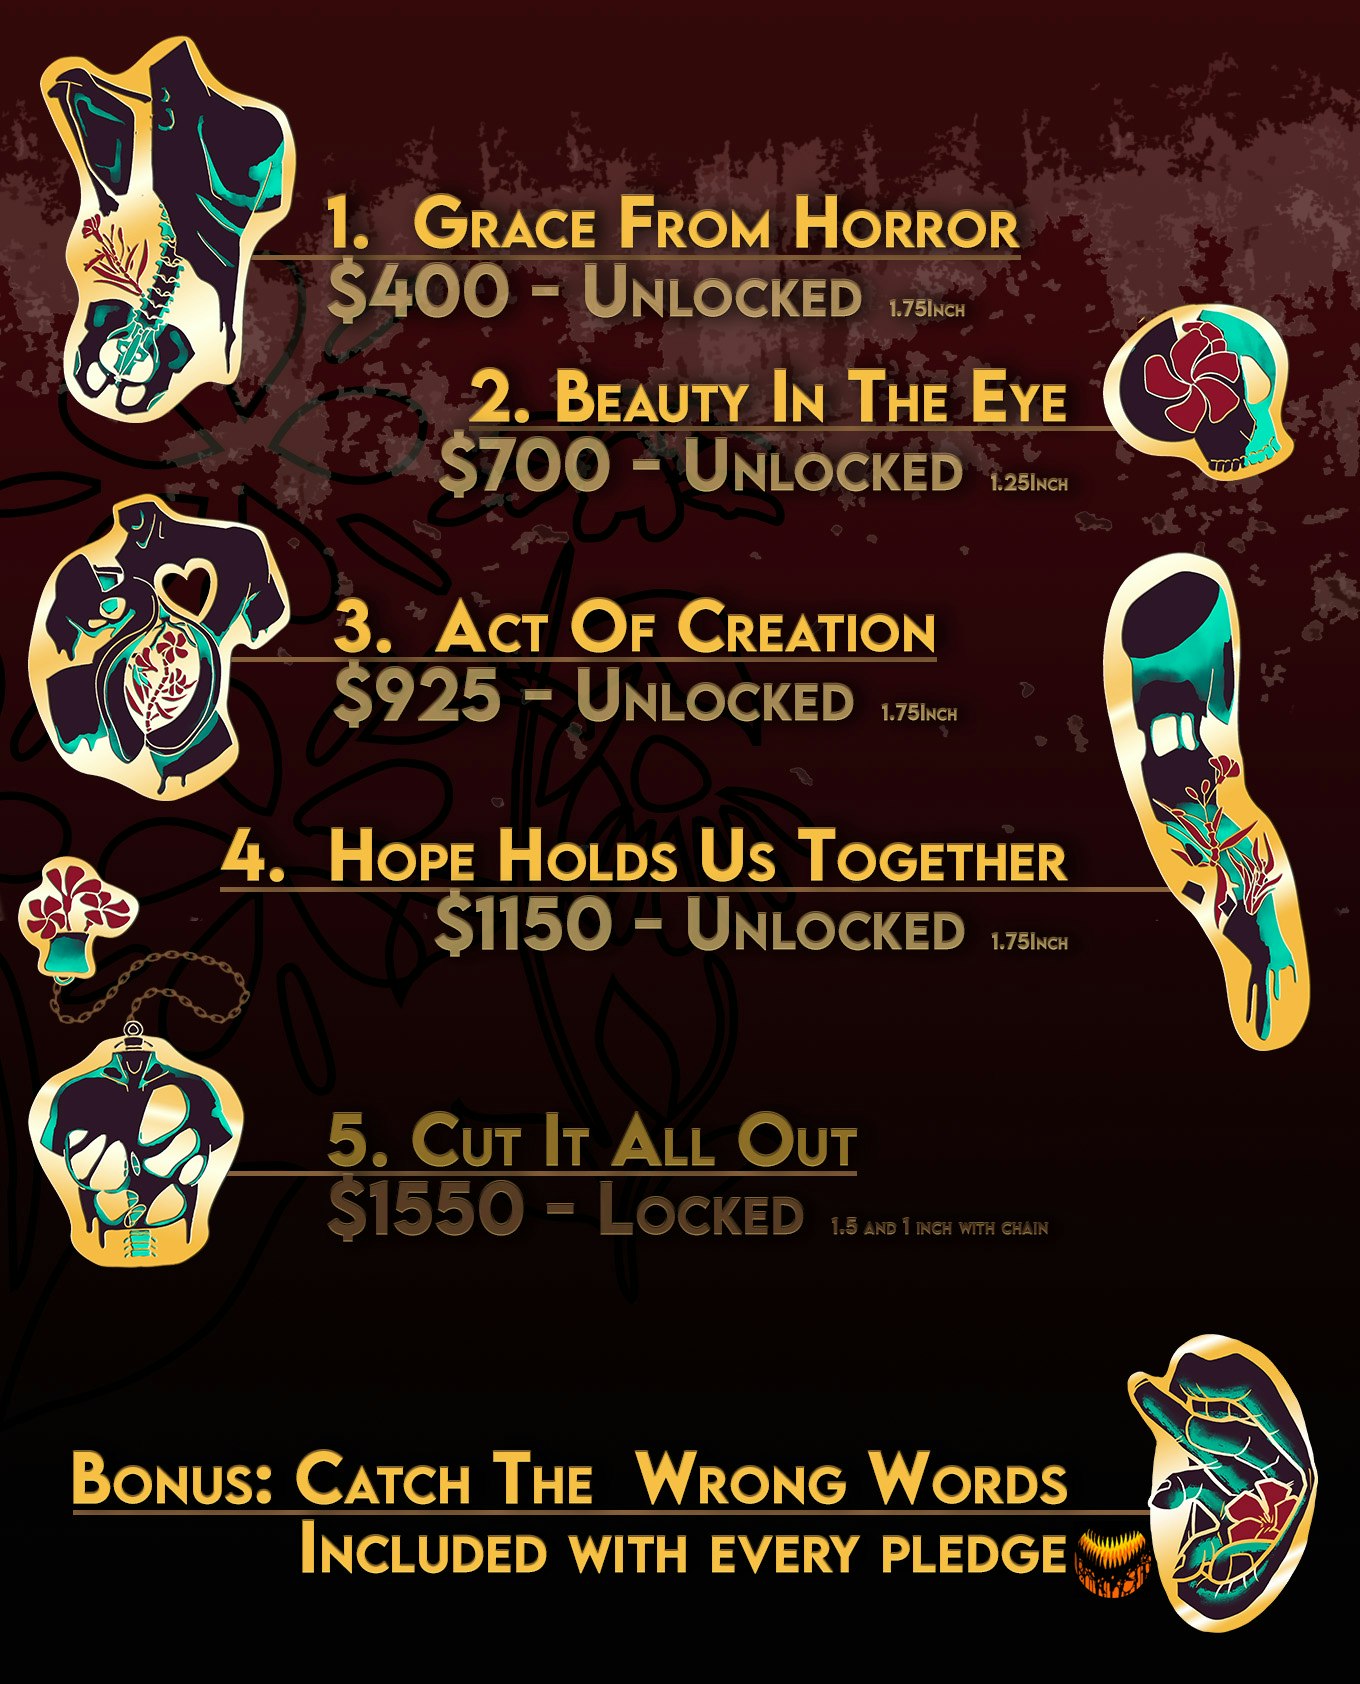 1. Grace from Horror: $400 - unlocked. 2. Beauty in the Eye: $700 - unlocked. 3. Act of Creation: $925 - unlocked. 4. Hope Holds us Together: $1150 - unlocked. 5. Cut it All Out: $1550 - locked. Bonus: Catch the Wrong Words included with every pledge.